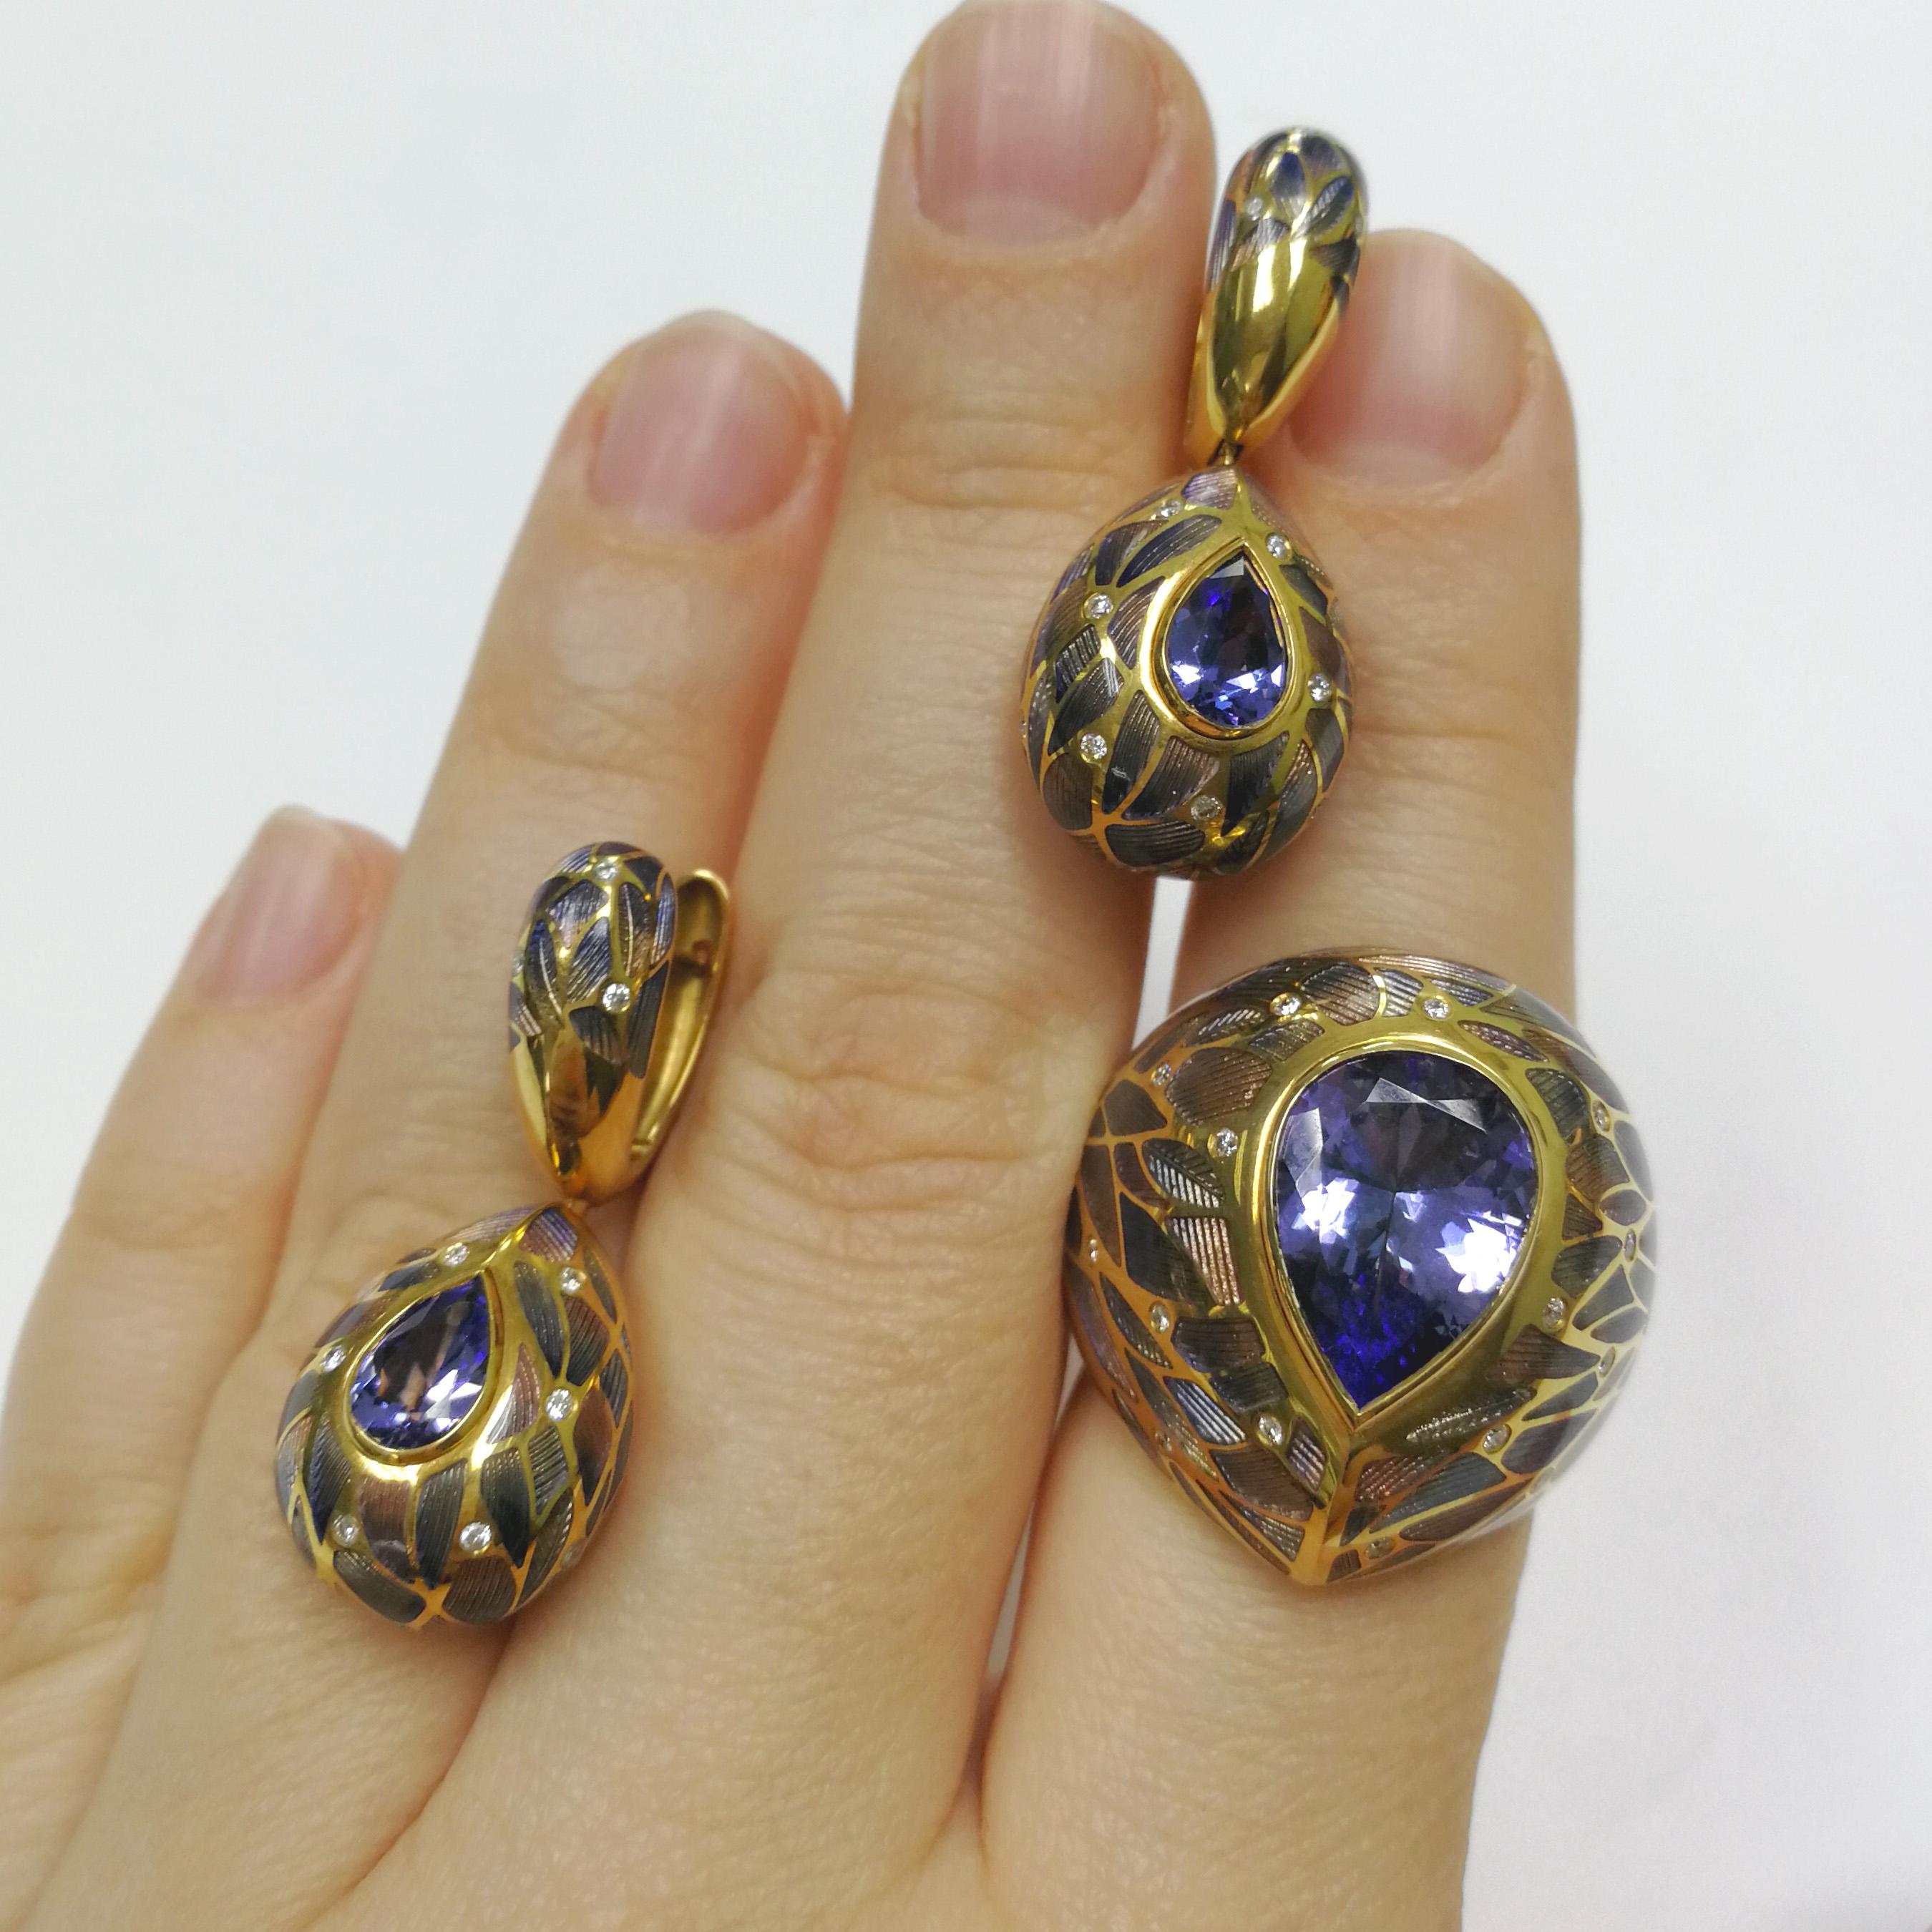 Tanzanite Diamonds 18 Karat Yellow Gold Four Seasons Suite
Suite from the Four Seasons Collection is more like a transition from autumn to winter. The patterns on Yellow 18 Karat Gold are made from specially selected shades of Enamel to show the